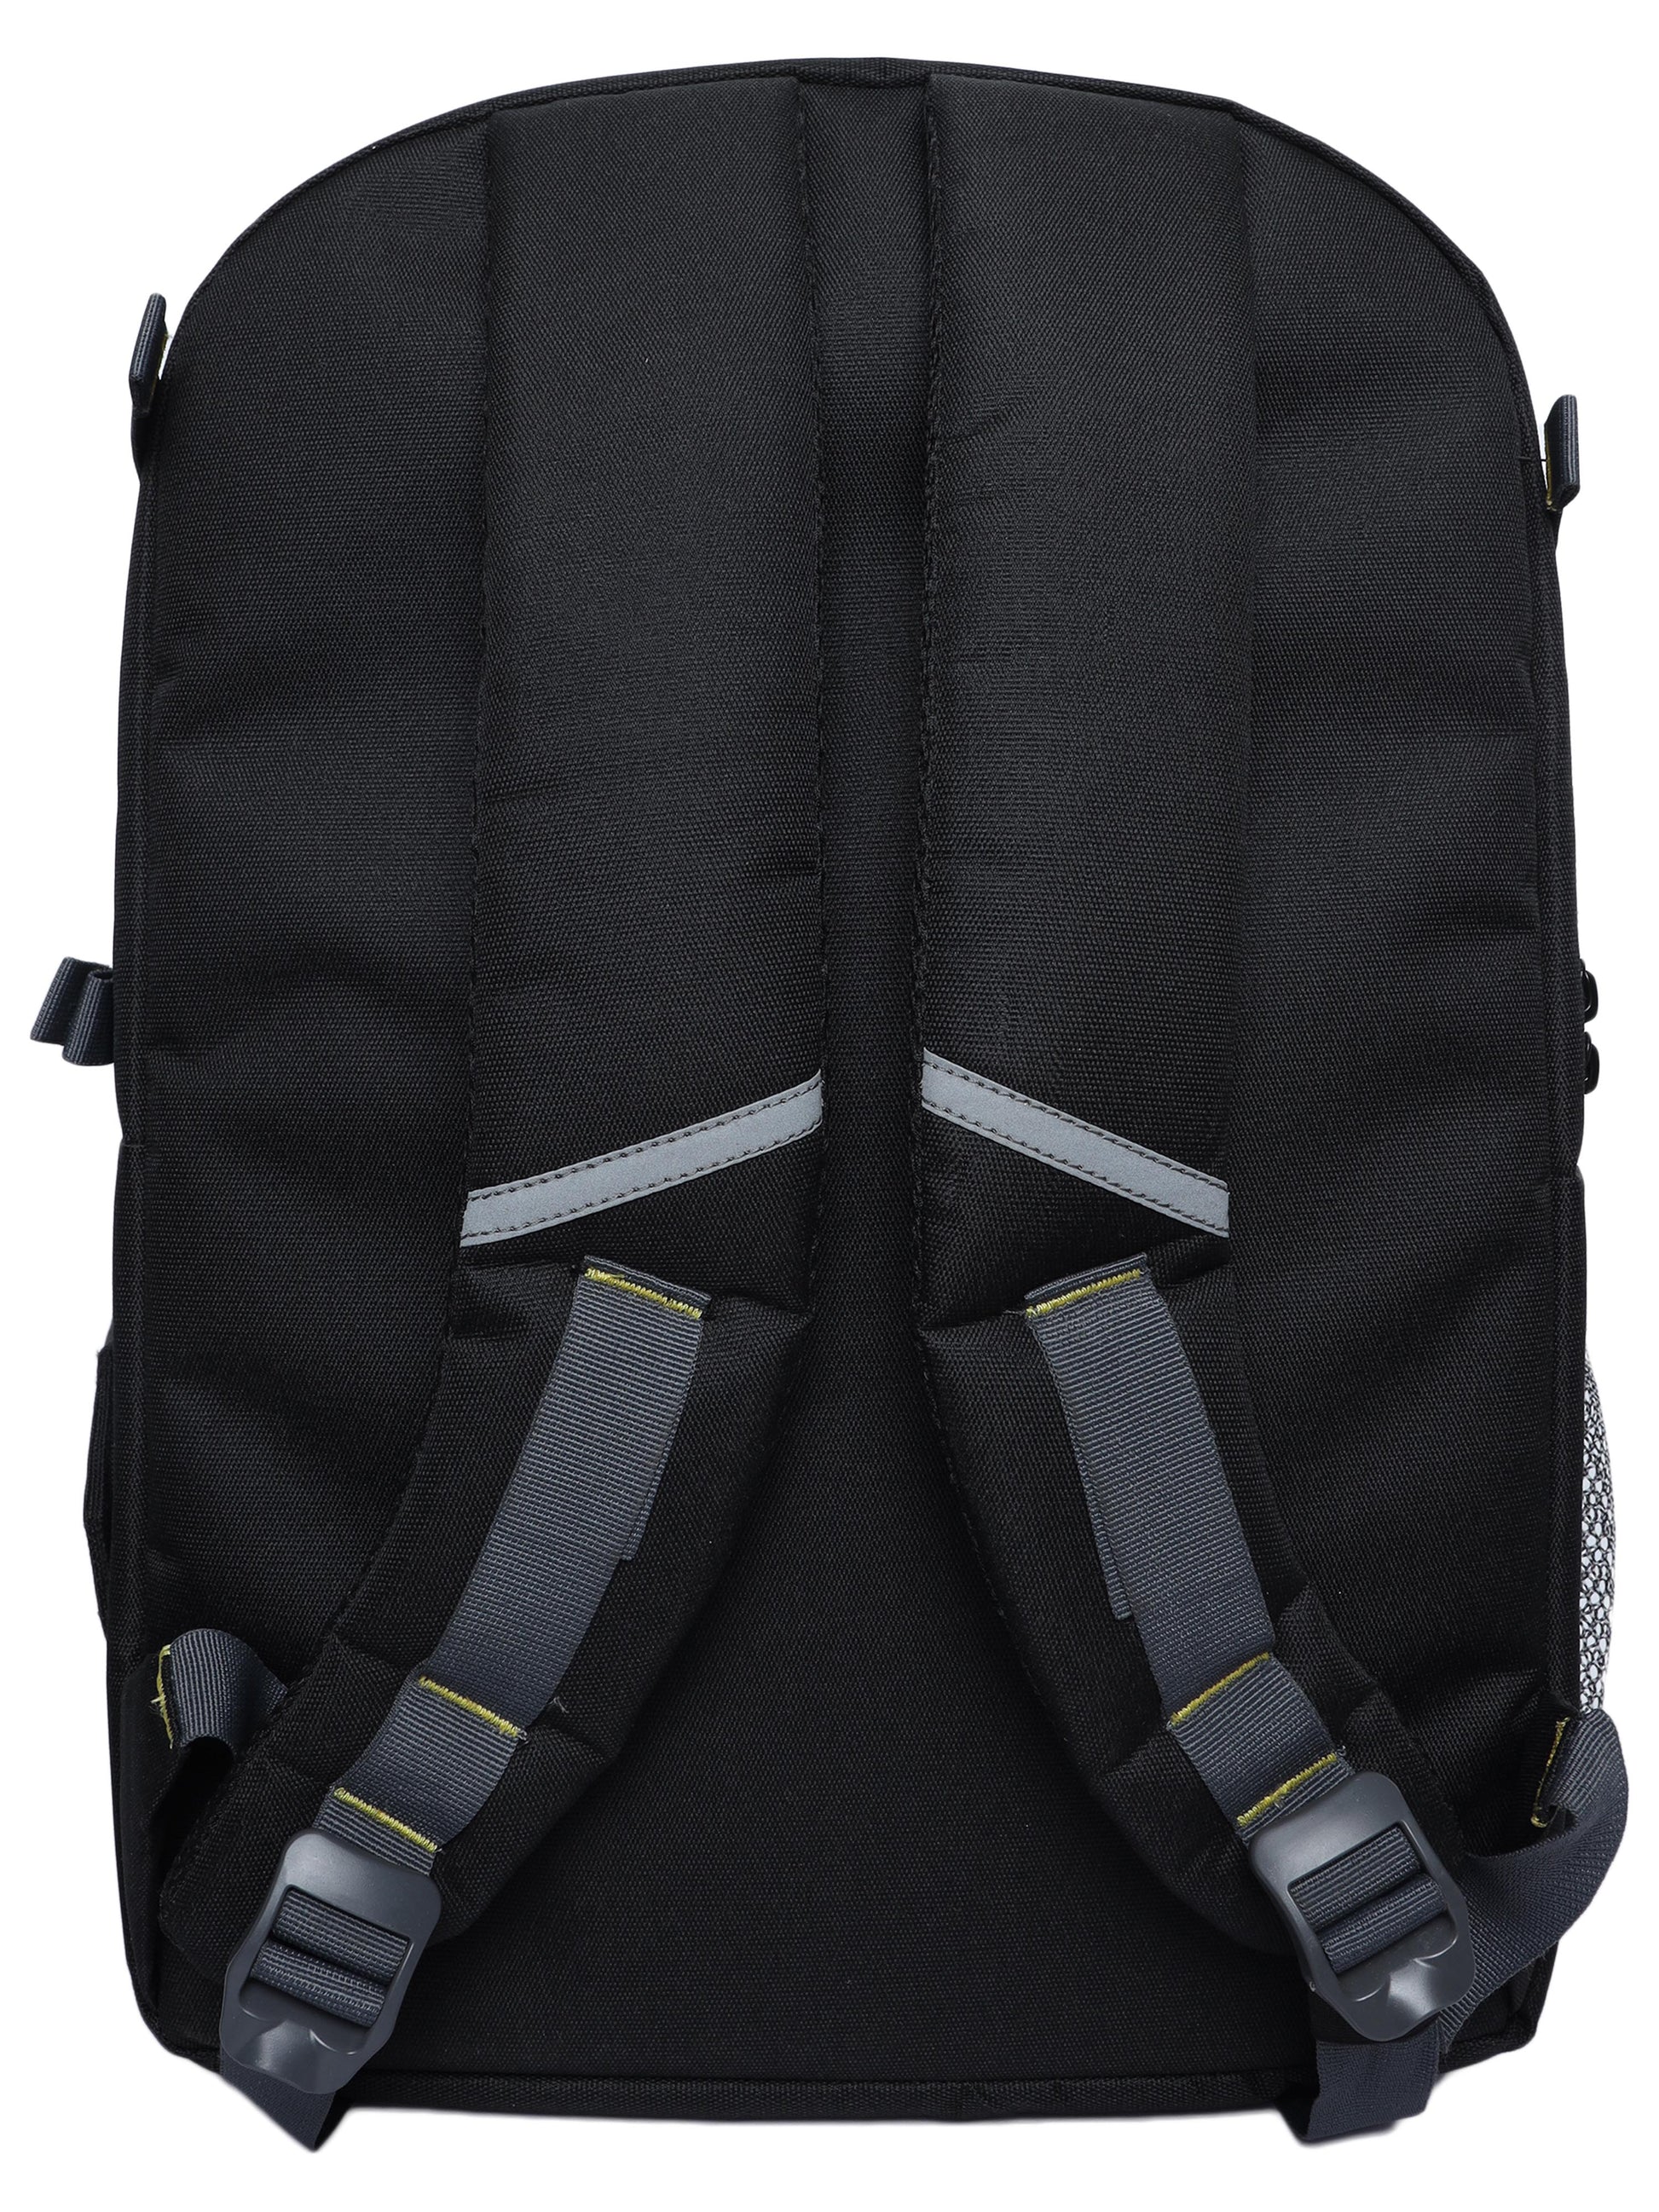 Image: Back view of the G14 Screenshot DSLR camera bag, featuring padded shoulder straps and a breathable mesh back panel for enhanced comfort during long photography sessions. The ergonomic design and adjustable features provide a personalized fit, reducing fatigue and ensuring a pleasant carrying experience. The bag's durable construction and waterproof design offer reliable protection for your valuable camera equipment.